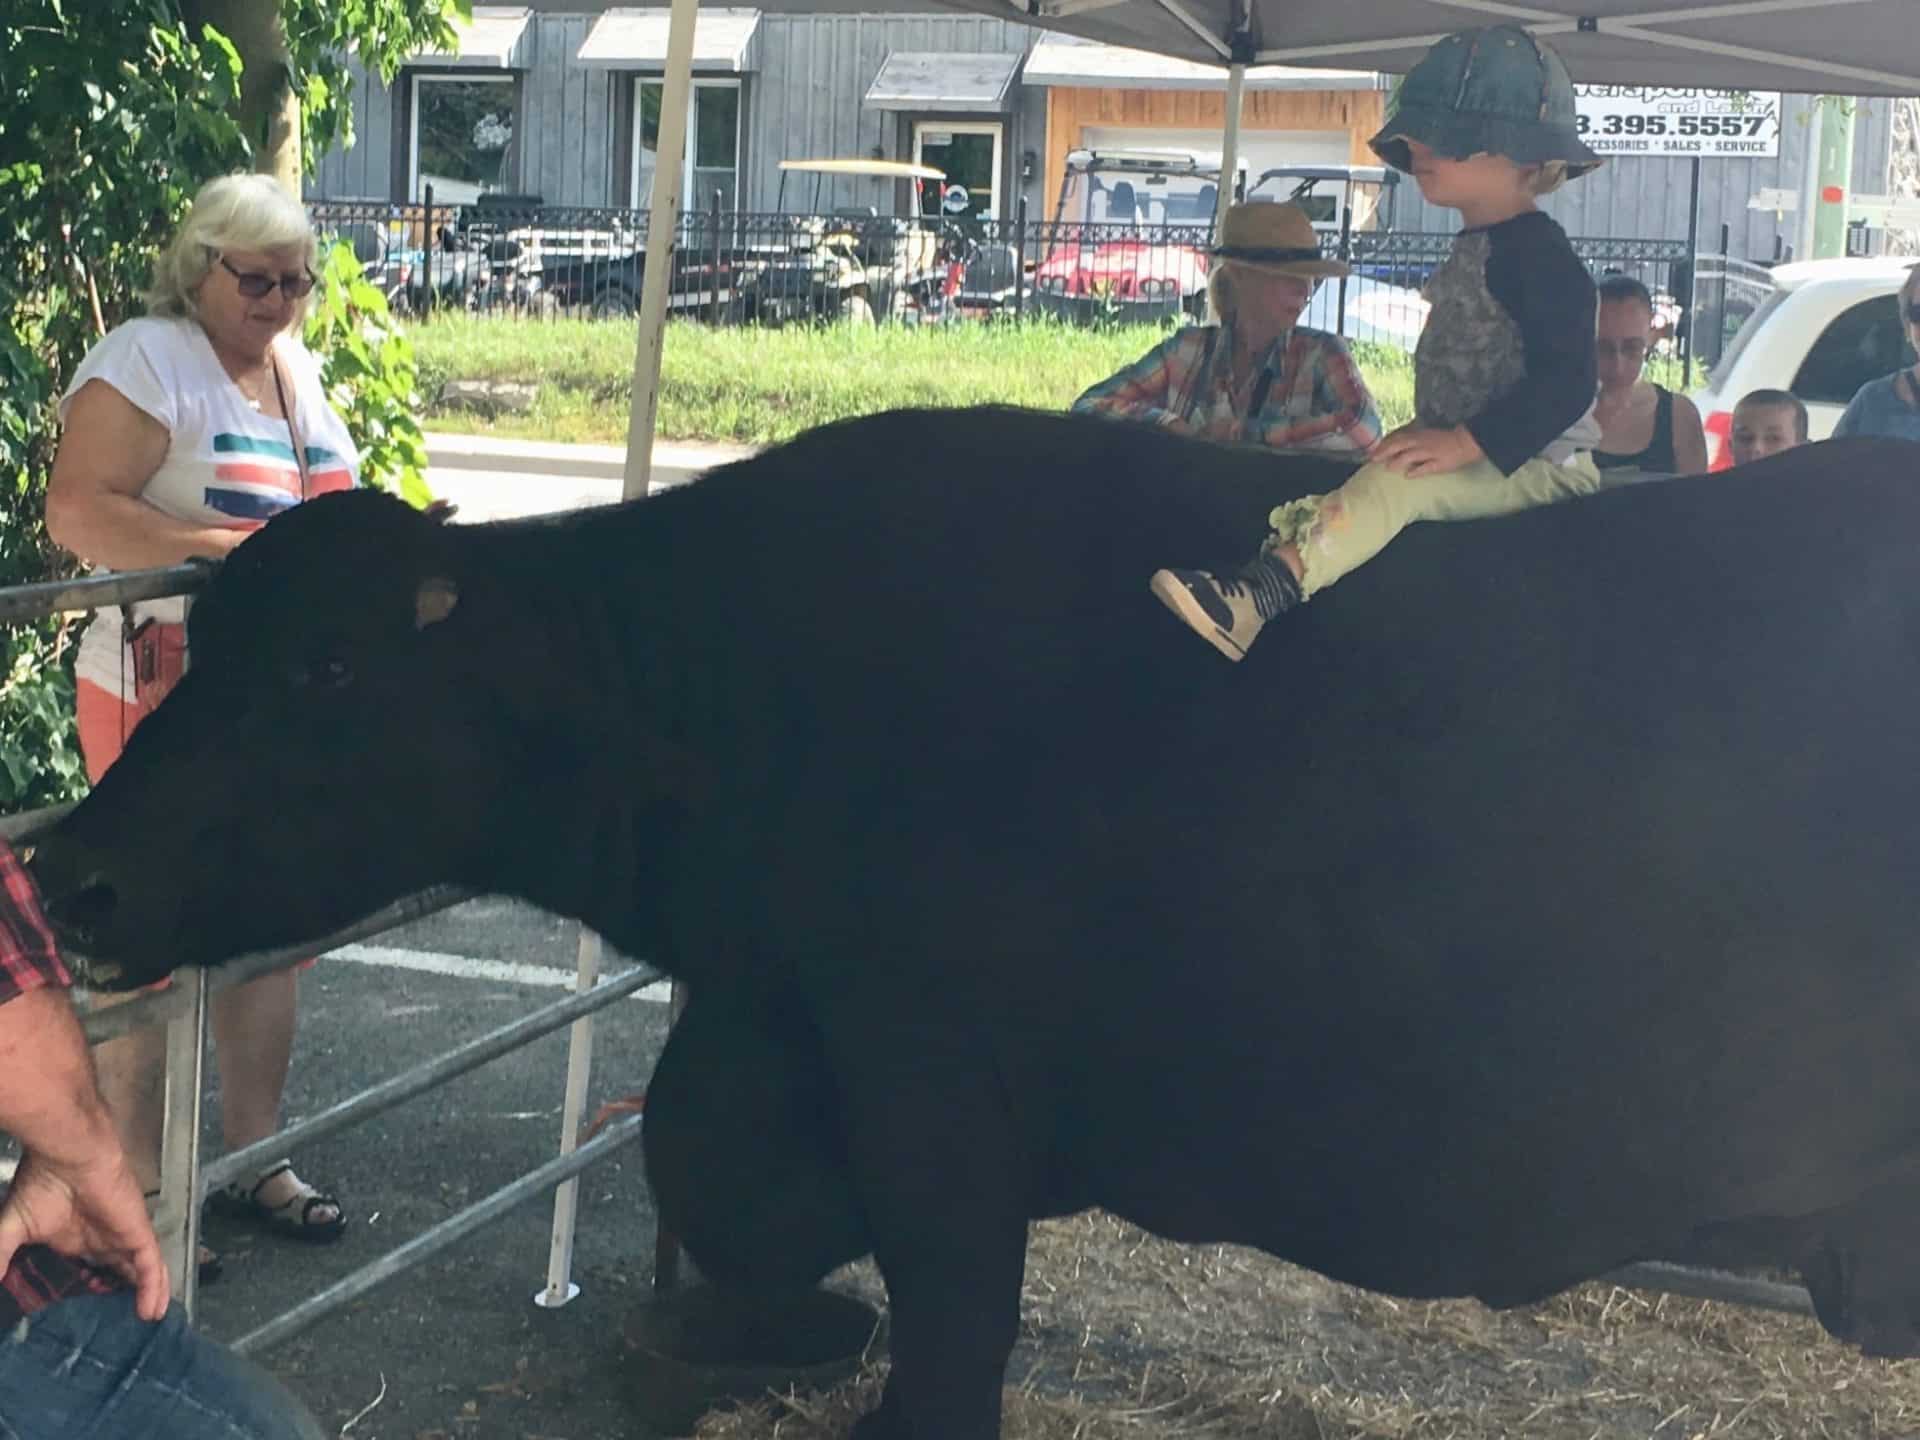 Riding a Water Buffalo - No Pick-Up in Toronto! Business as Usual on the Farm